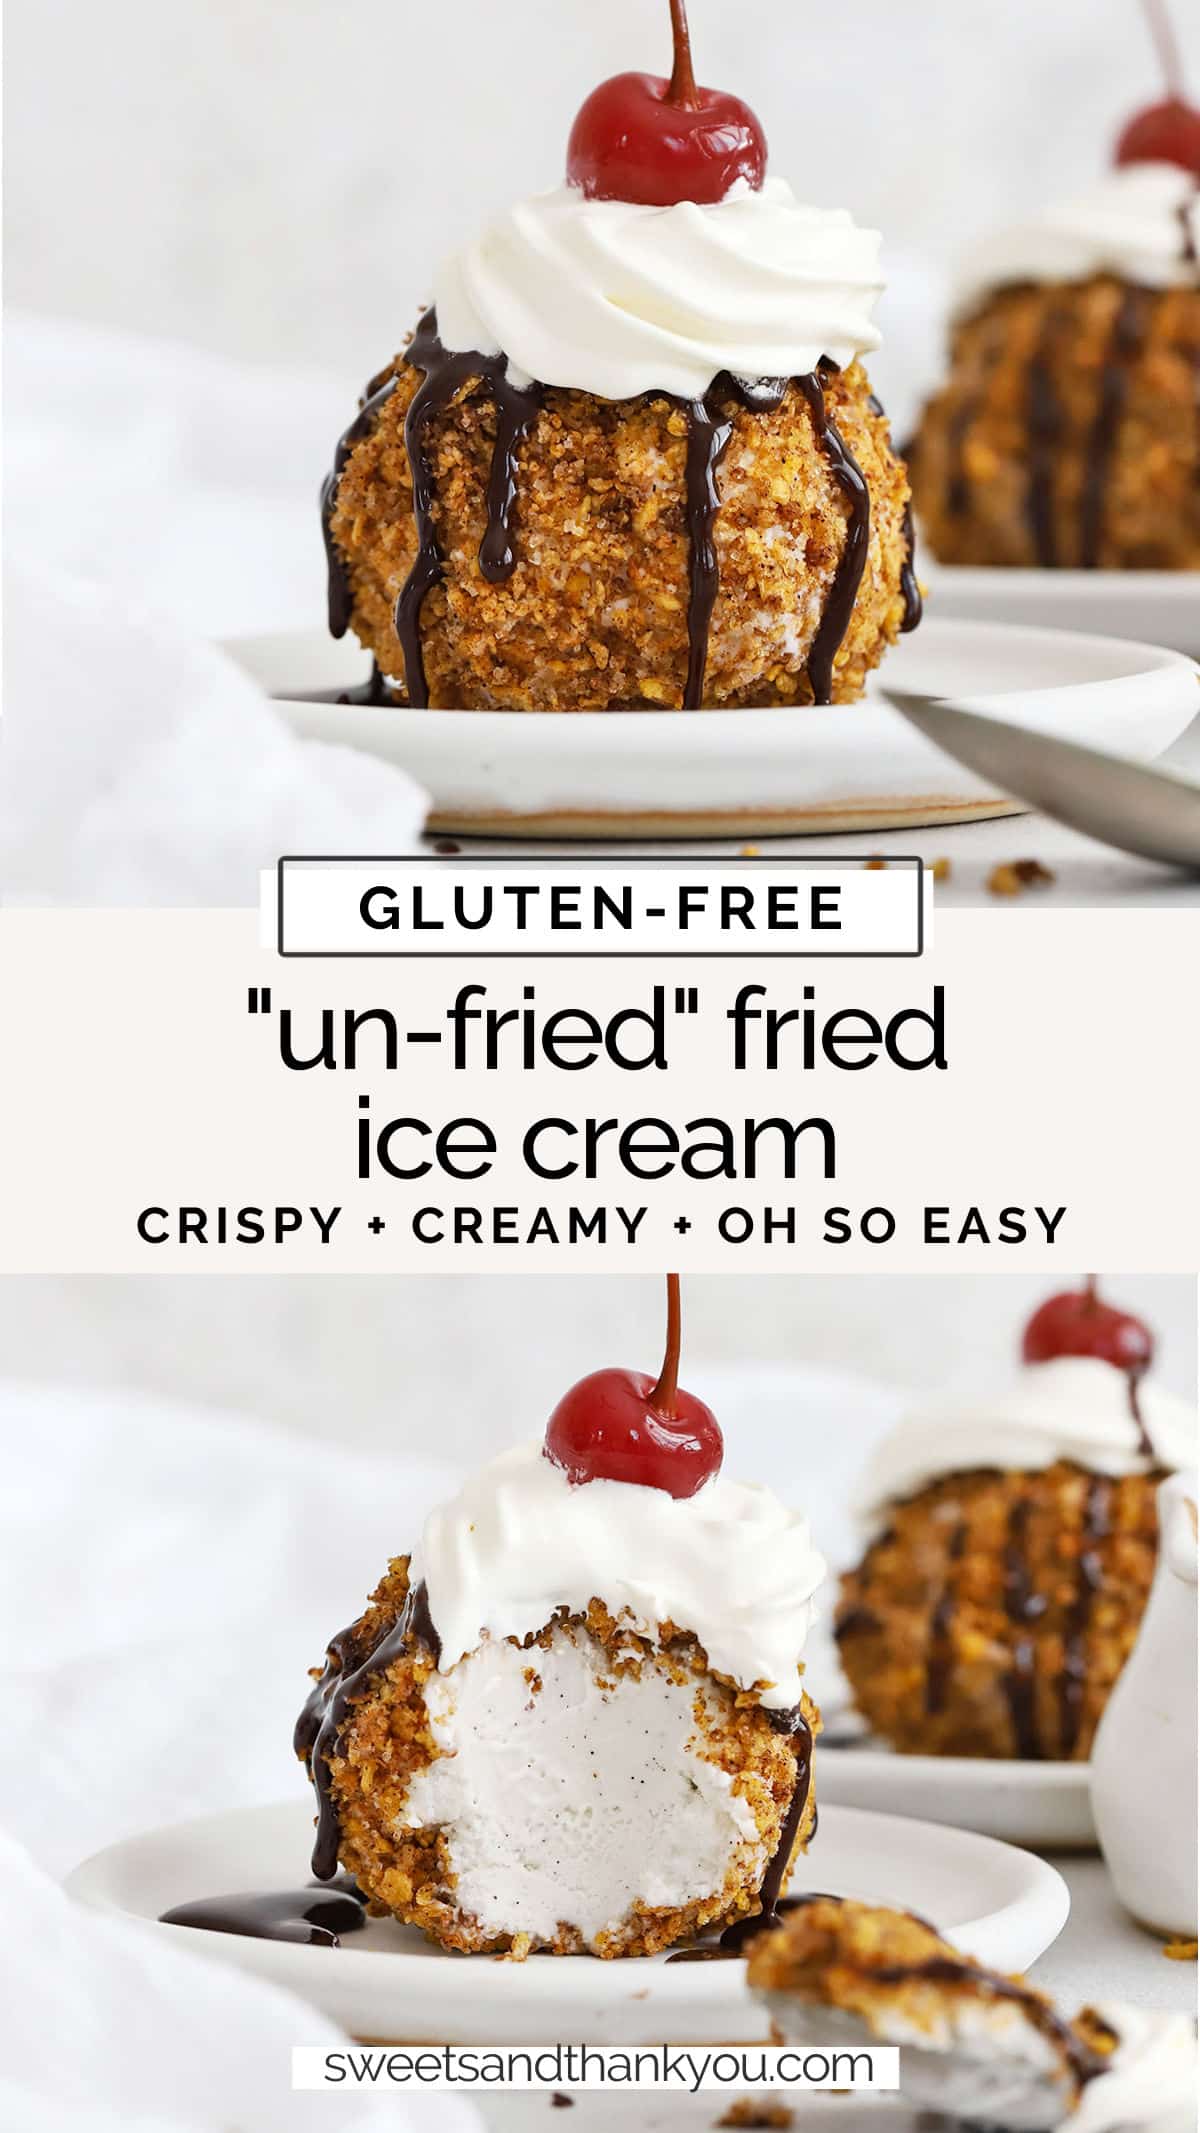 Gluten-Free Fried Ice Cream - Our un-fried gluten-free fried ice cream recipe is so easy and delicious. You'll love the cinnamon-y crunch of the coating with the creamy ice cream! // easy fried ice cream recipe // gluten free ice cream // gluten free summer dessert // tex mex dessert // fried ice cream coating // gluten free unfried ice cream // gluten free fried ice cream no deep frying // gluten free fried ice cream no oil // gluten free dessert // no bake gluten-free dessert